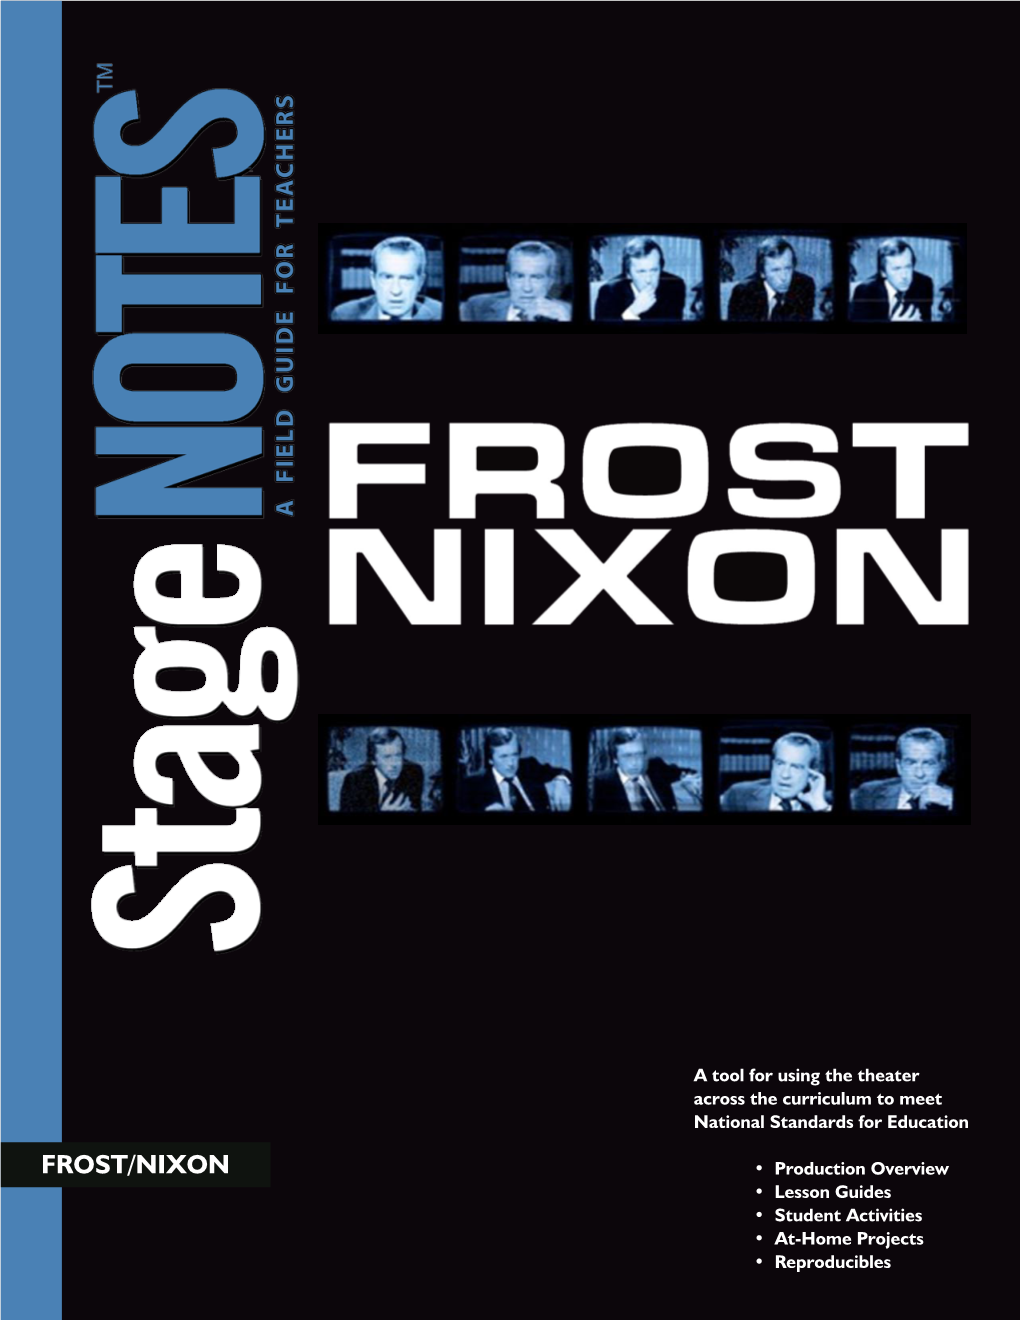 FROST/NIXON • Production Overview • Lesson Guides • Student Activities • At-Home Projects • Reproducibles Copyright 2008, Camp Broadway, LLC All Rights Reserved